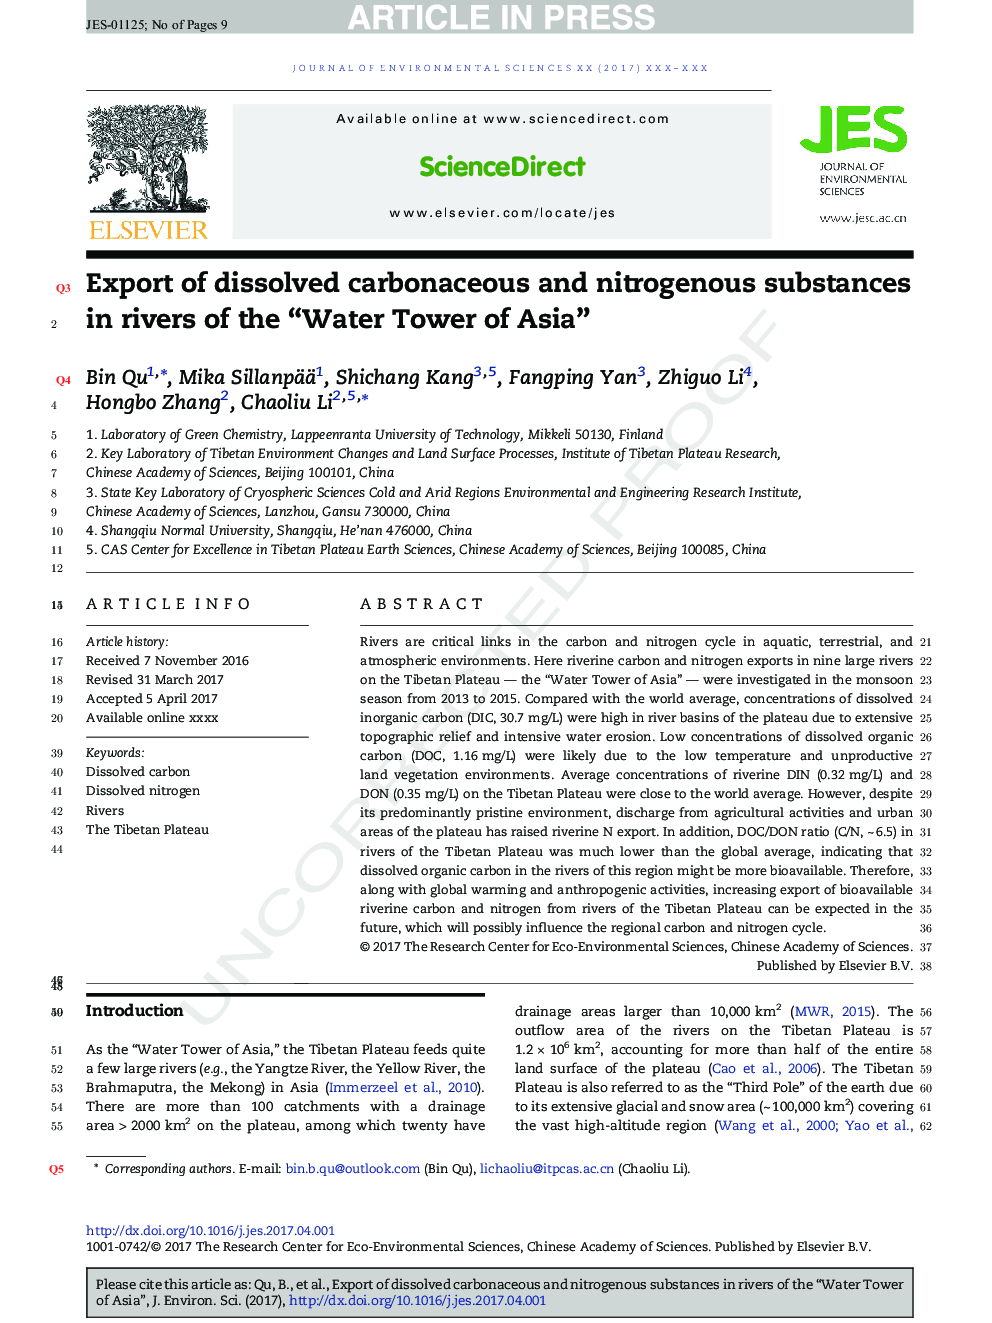 Export of dissolved carbonaceous and nitrogenous substances in rivers of the “Water Tower of Asia”